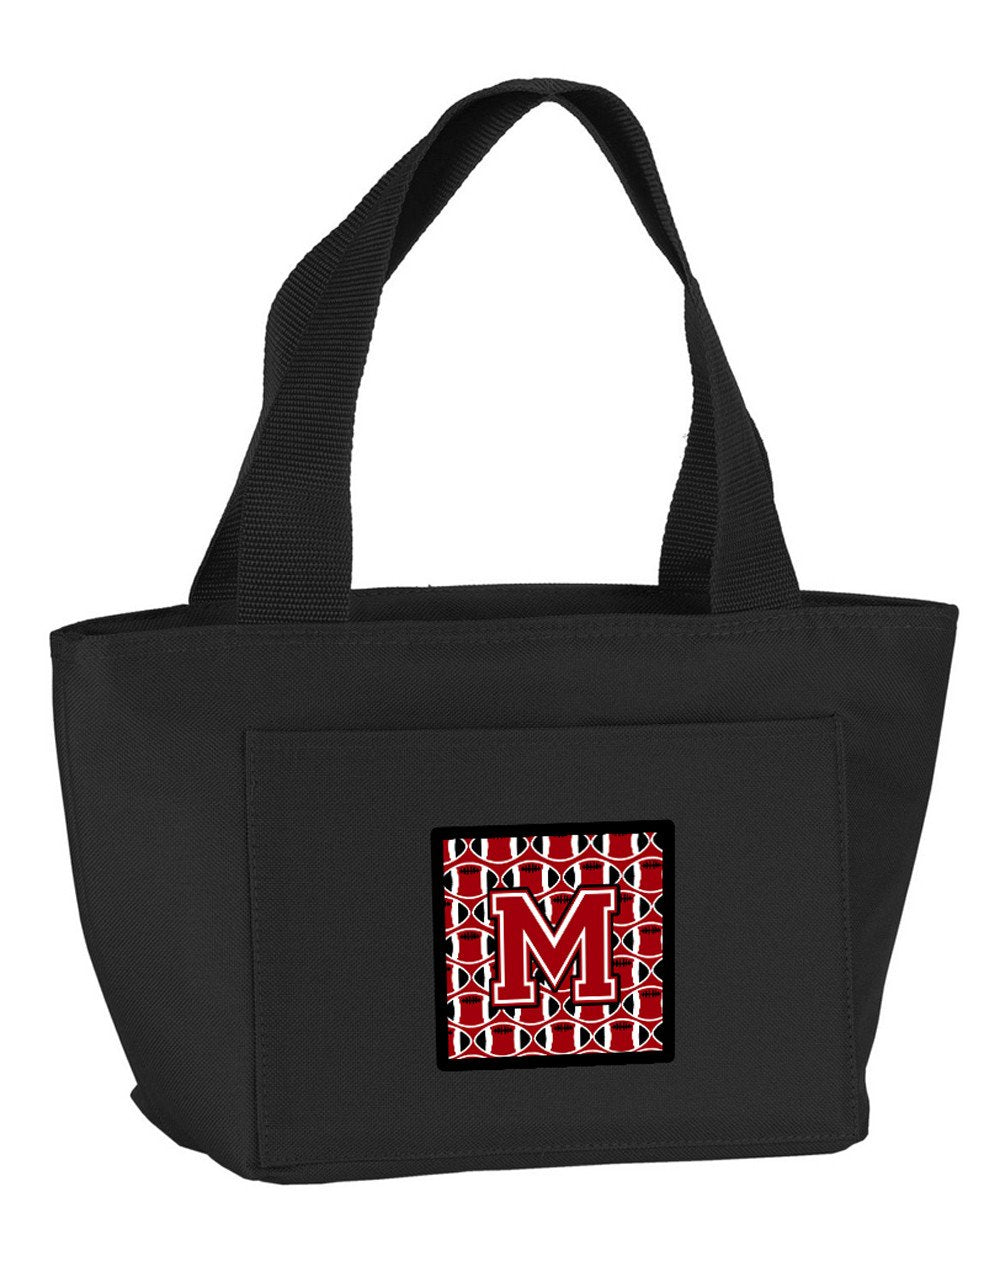 Letter M Football Red, Black and White Lunch Bag CJ1073-MBK-8808 by Caroline's Treasures